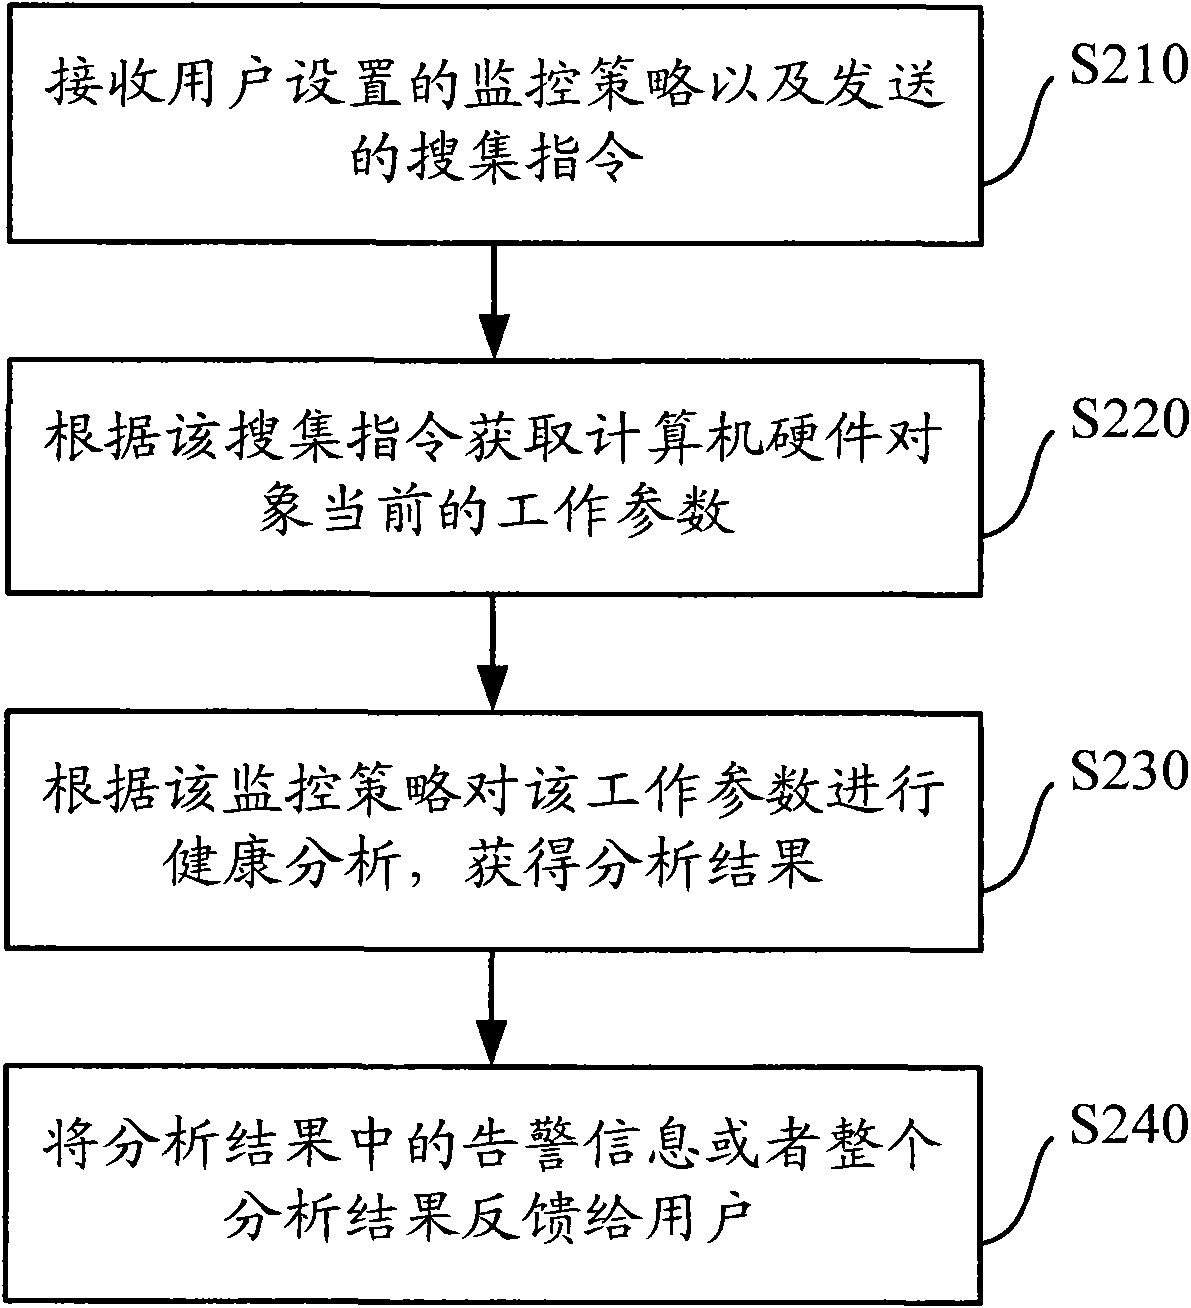 Computer health monitoring and managing system and method